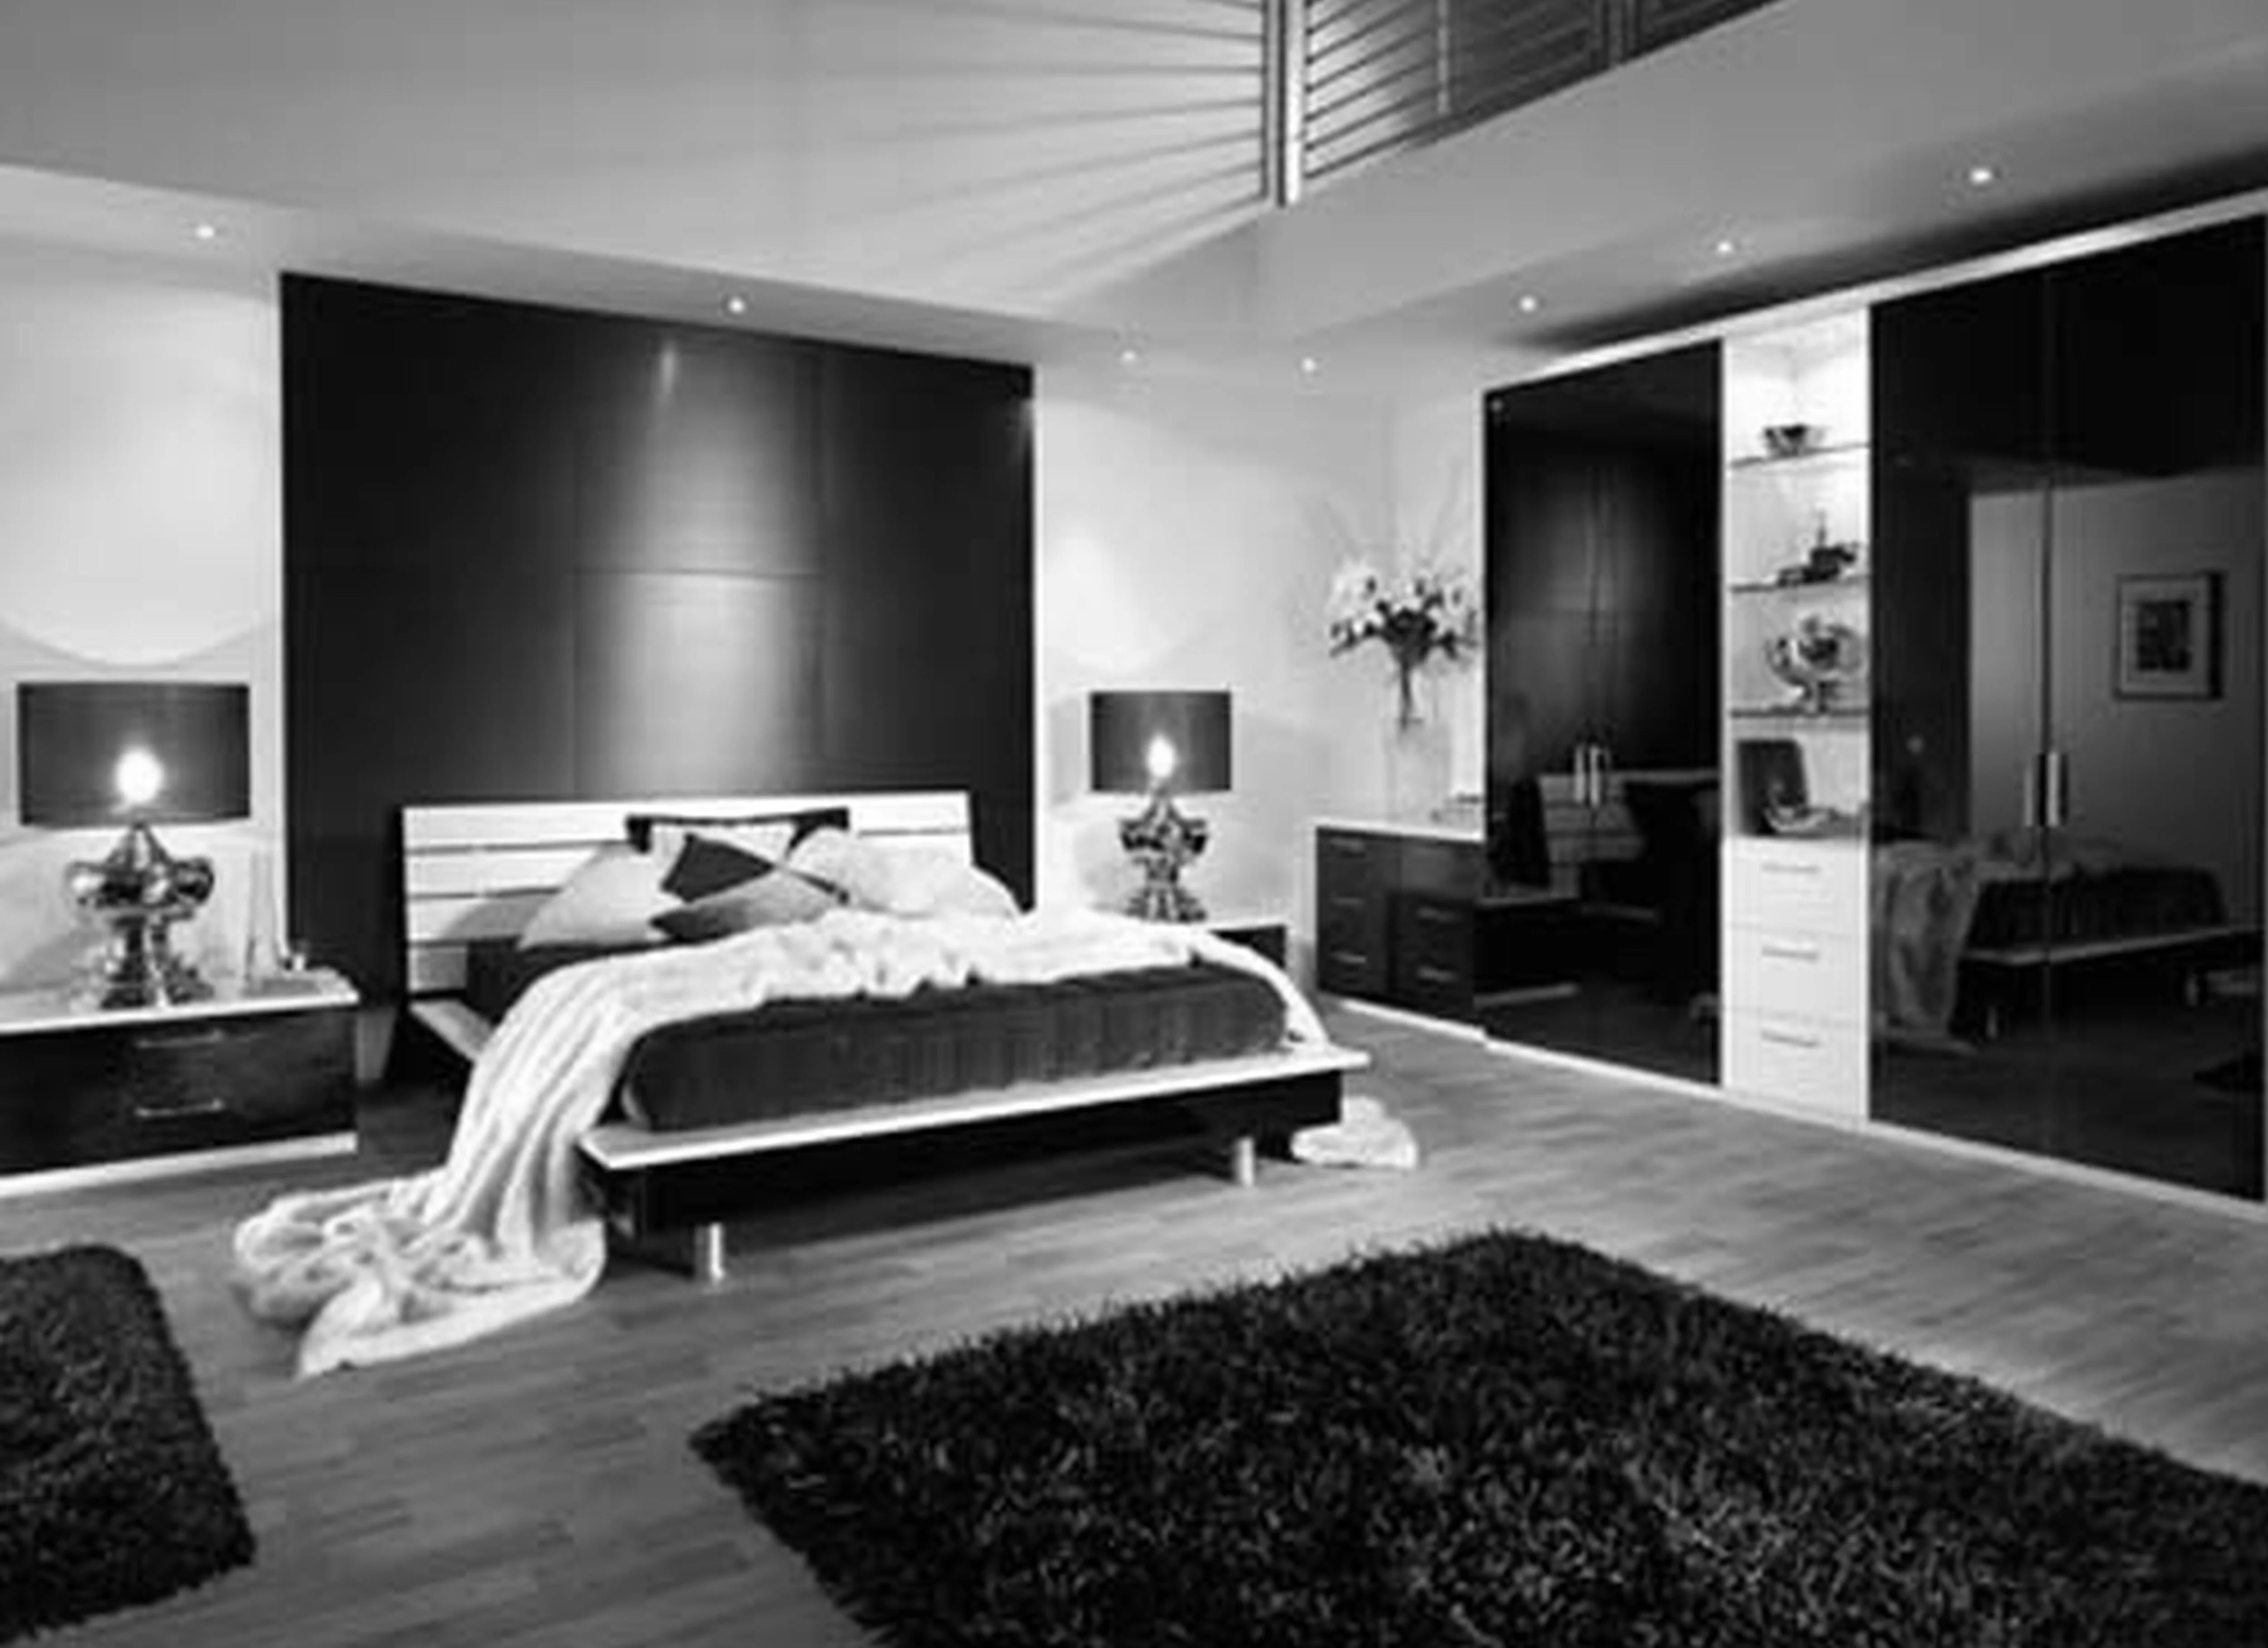 Wonderful Black And White Bedrooms Furnishing Themes With Custom Handmade Low Master Bed Frames On Dark Laminate Wood Floors And Black Bedroom Rugs In Modern Master Black And White Bedrooms Designs B Pertaining To Bedroom Design Ideas Black And White